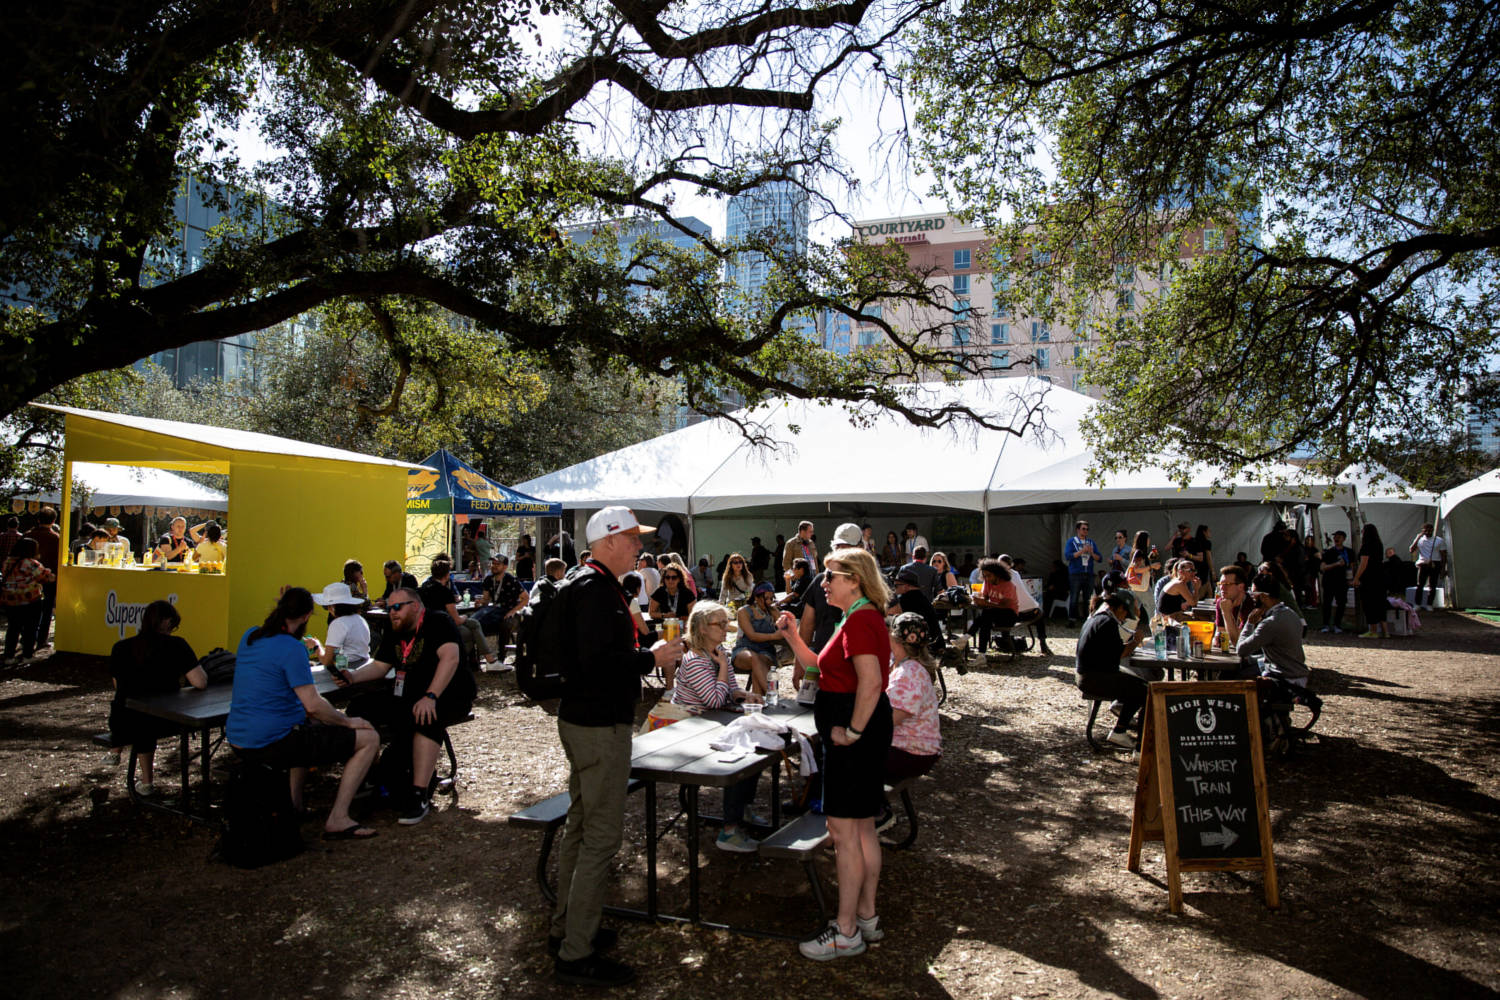 File Photo: Sxsw (south By Southwest) Conference And Festivals In Austin